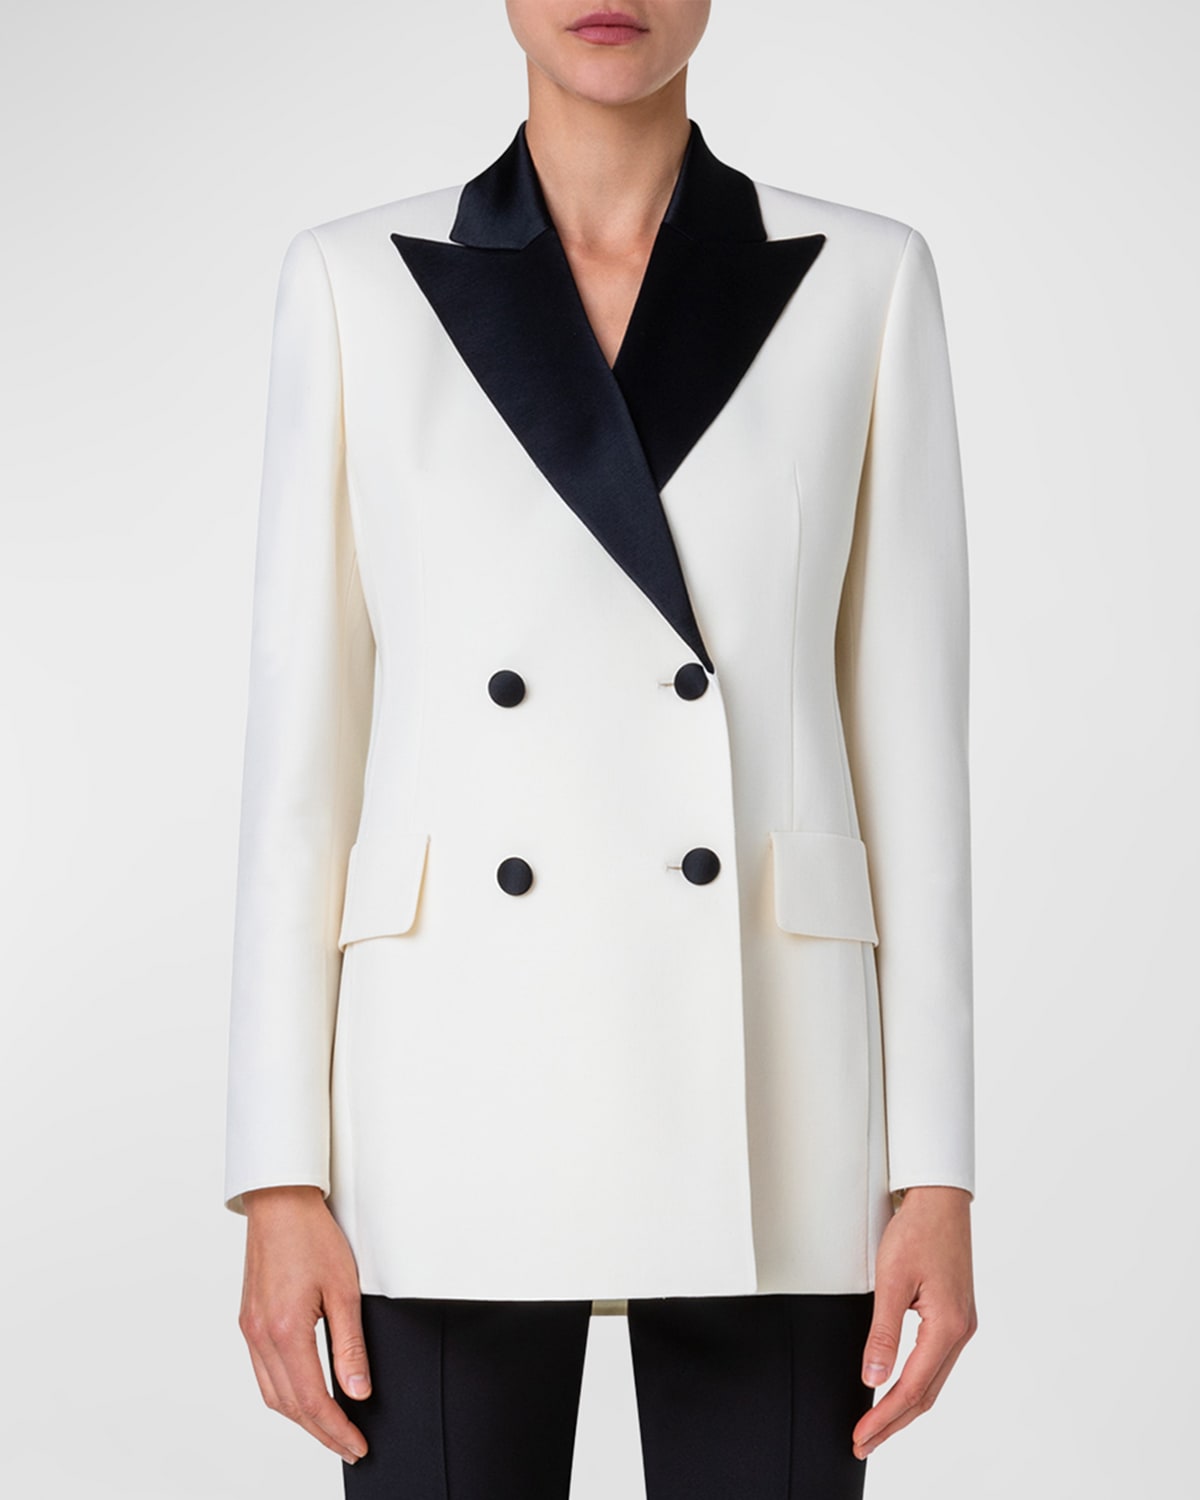 Double-Face Wool Tuxedo Jacket with Contrast Satin Lapel